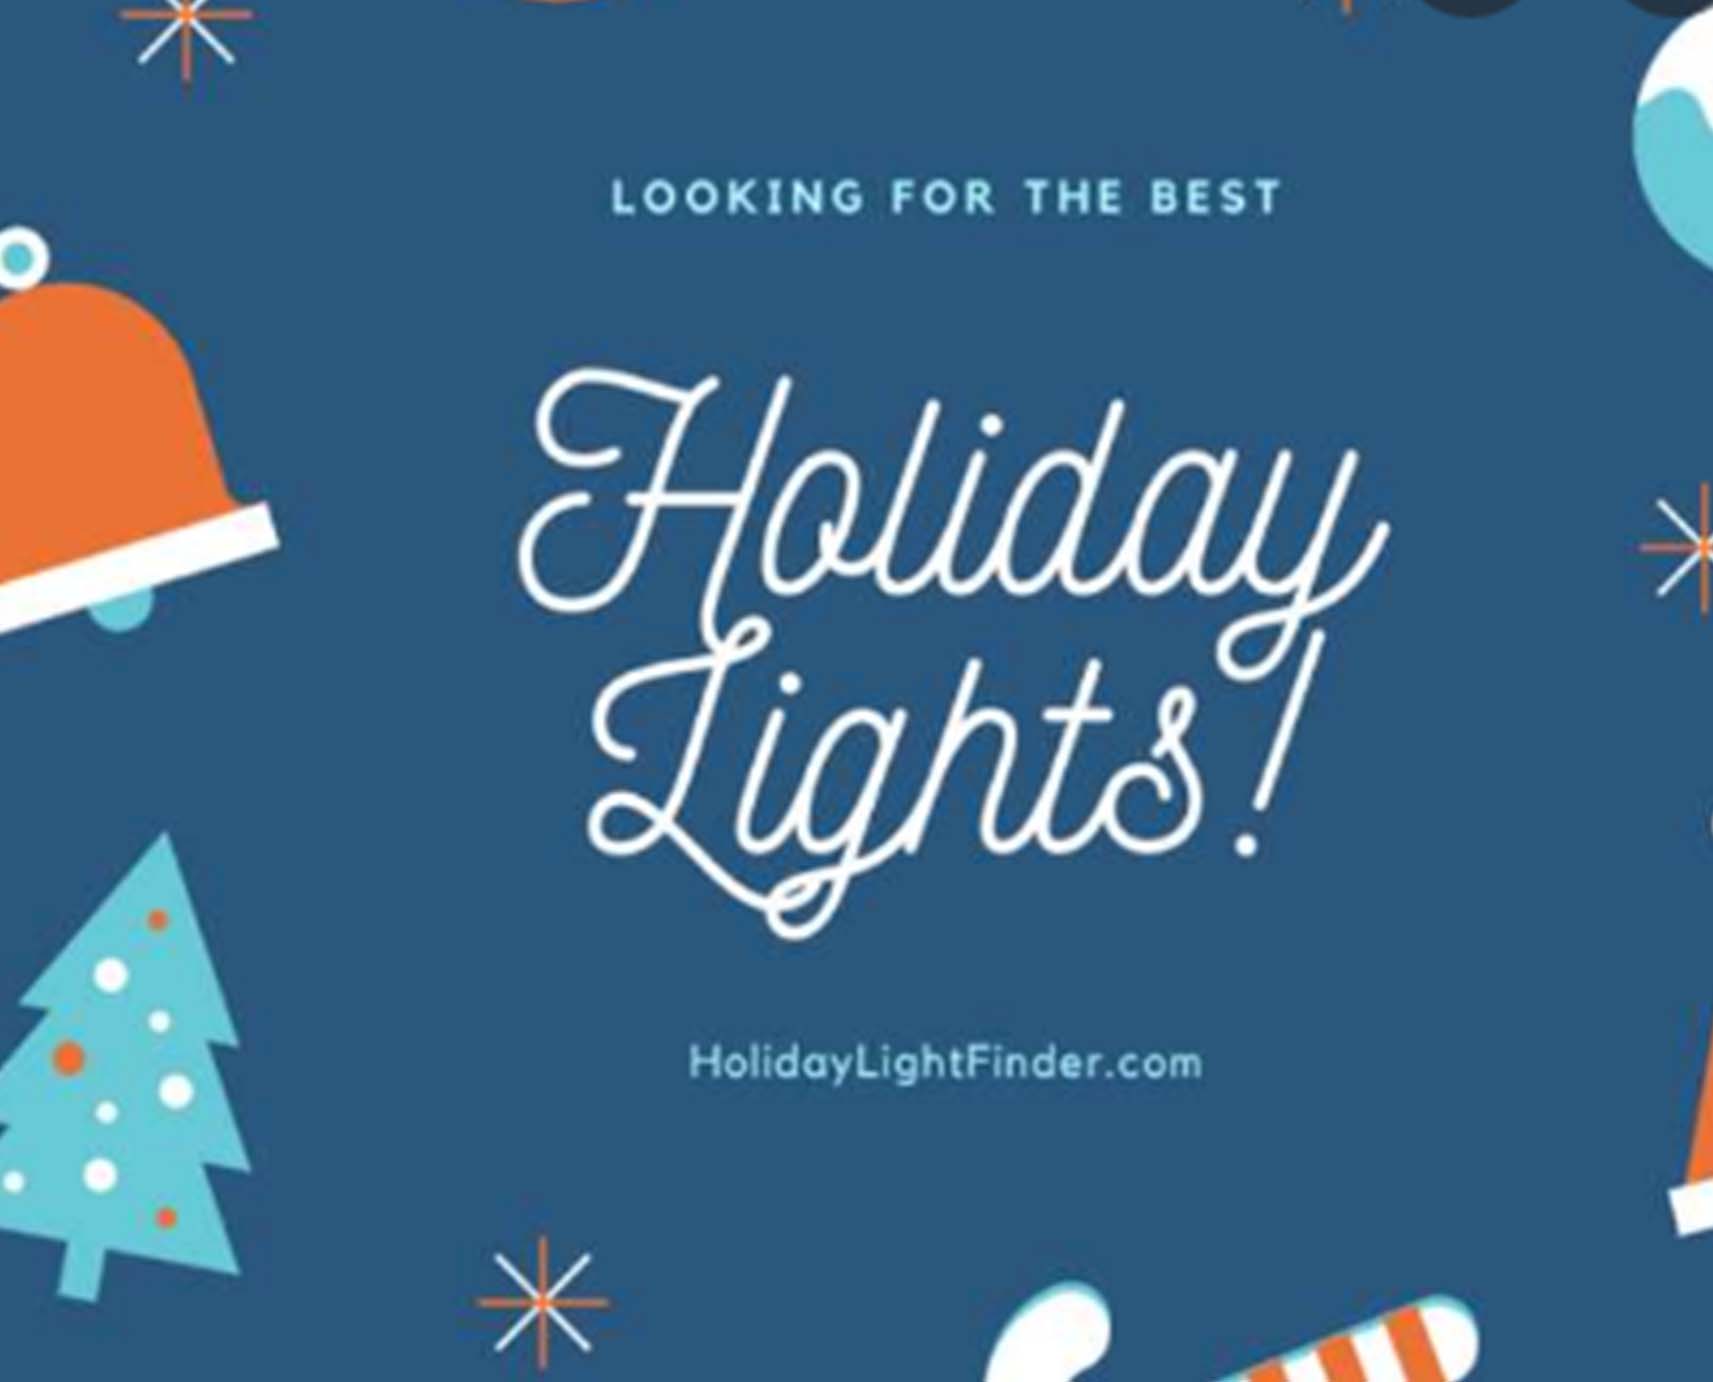 Holiday Light Stroll presented by Langley Federal Credit Union